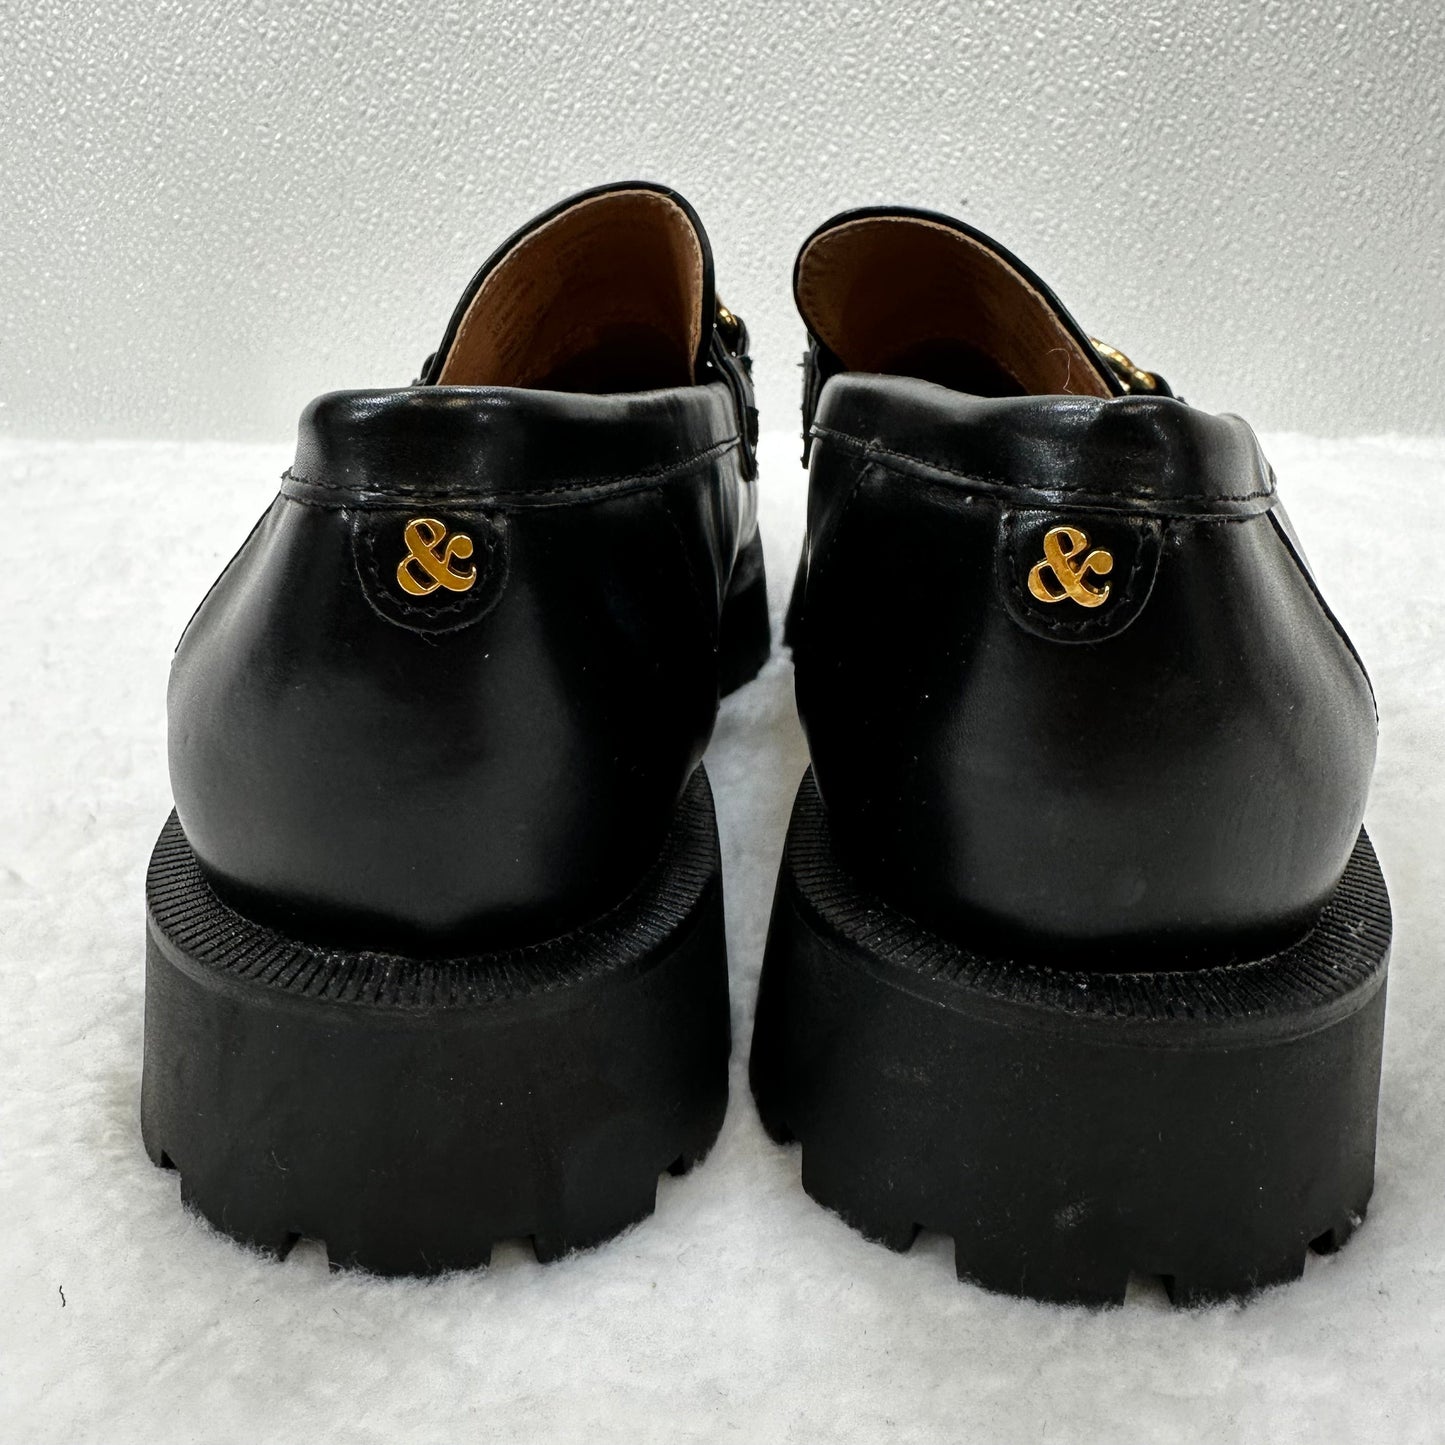 Black Shoes Flats Loafer Oxford Sam And Libby, Size 10